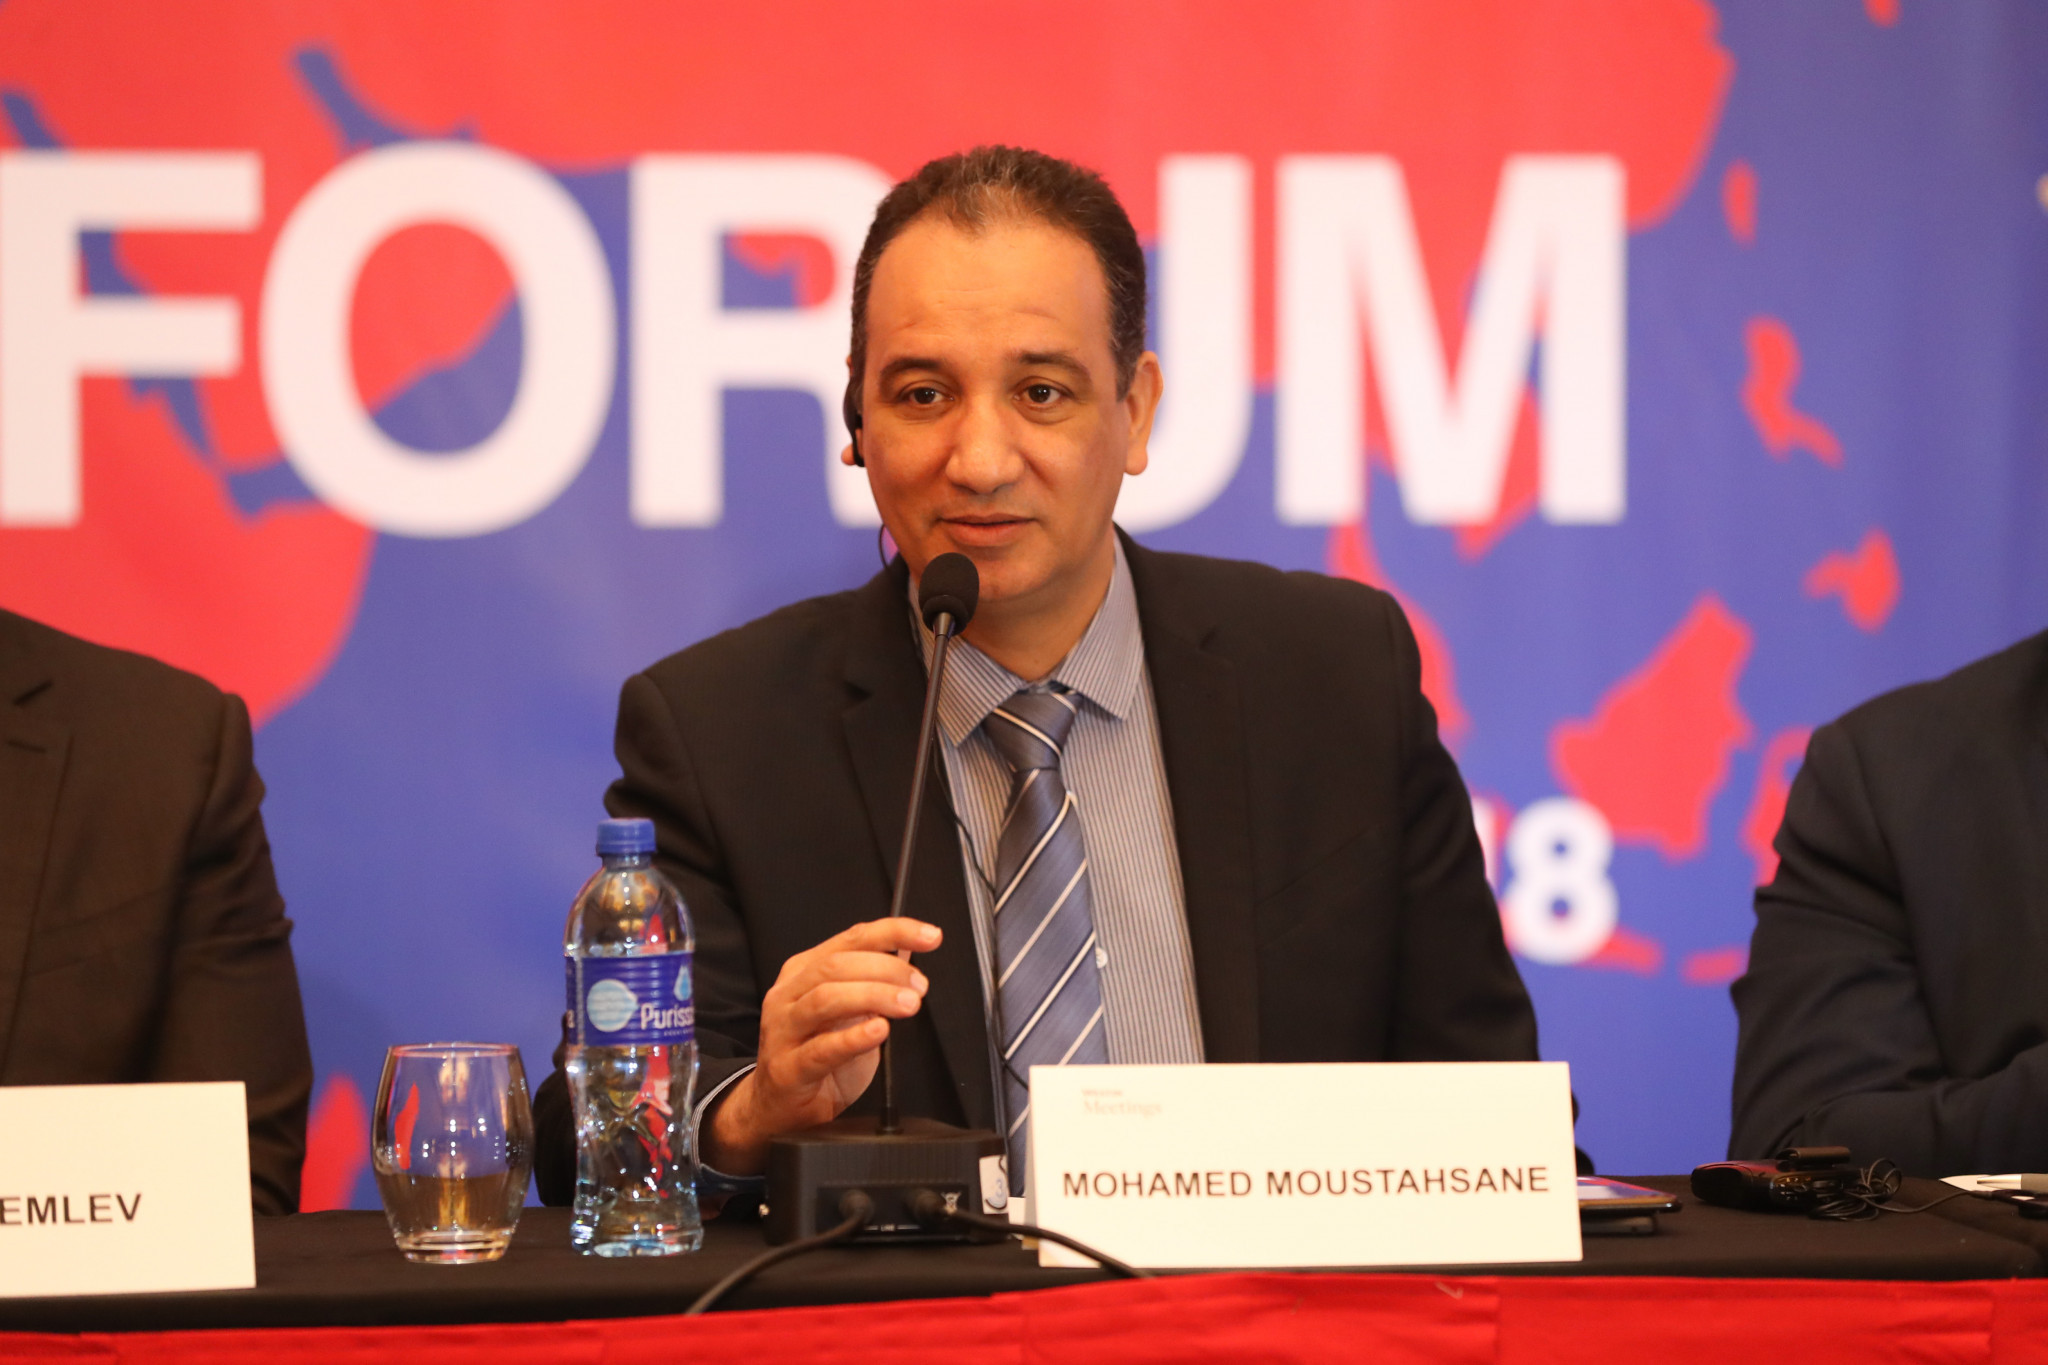 AIBA Interim President Mohamed Moustahsane is one of six candidates running against Umar Kremlev in the election ©AIBA